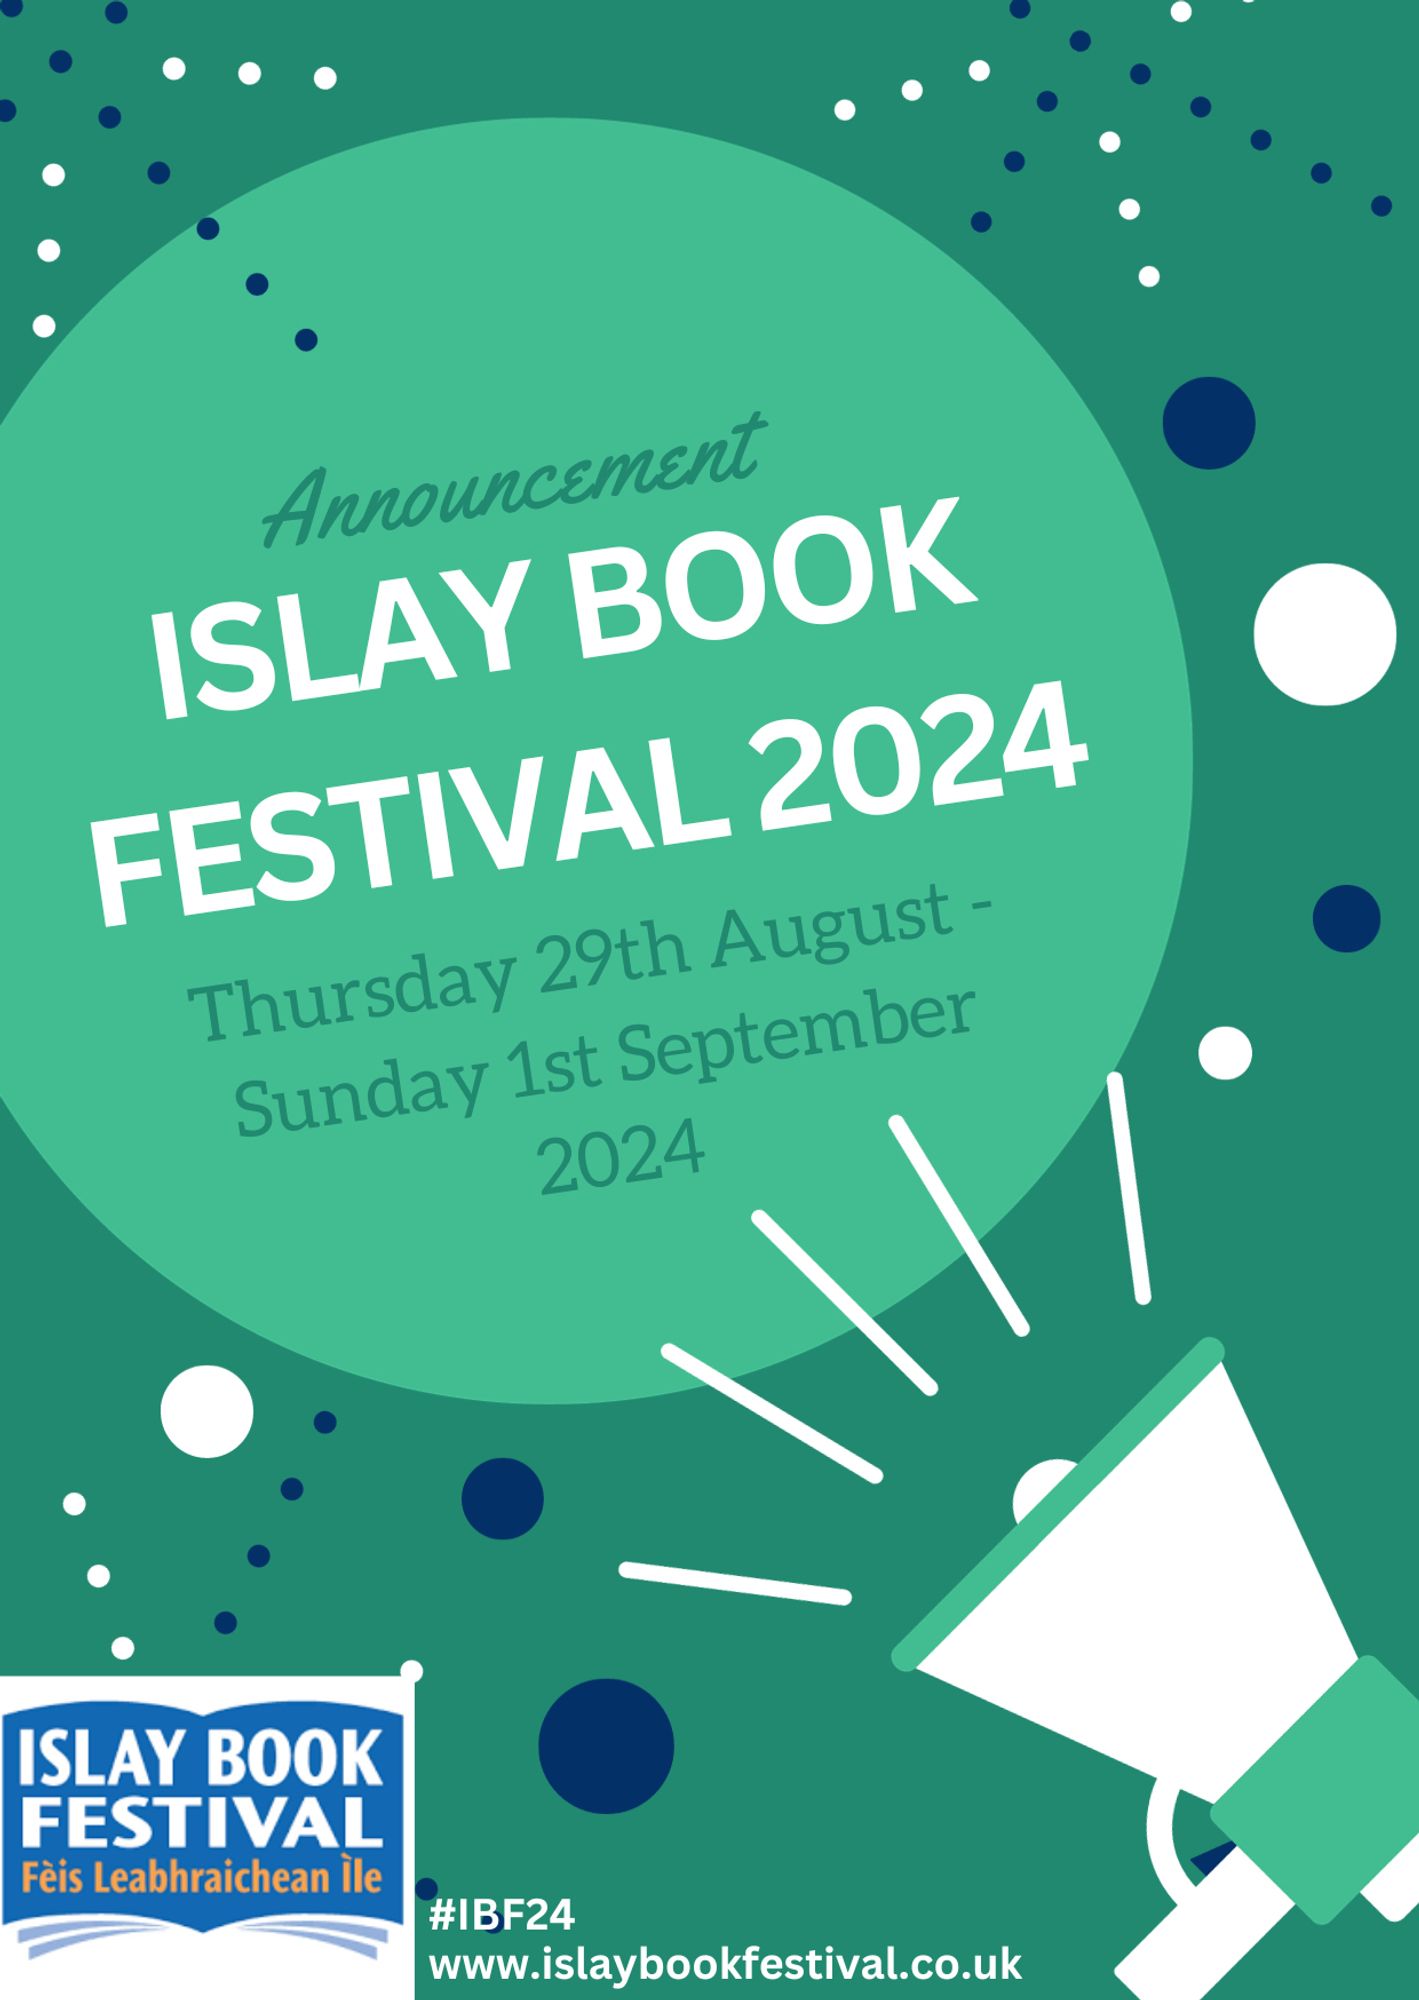 A green circle on a darker green background, announcing the dates of Islay Book Festival 2024 - 29th August to 1st September